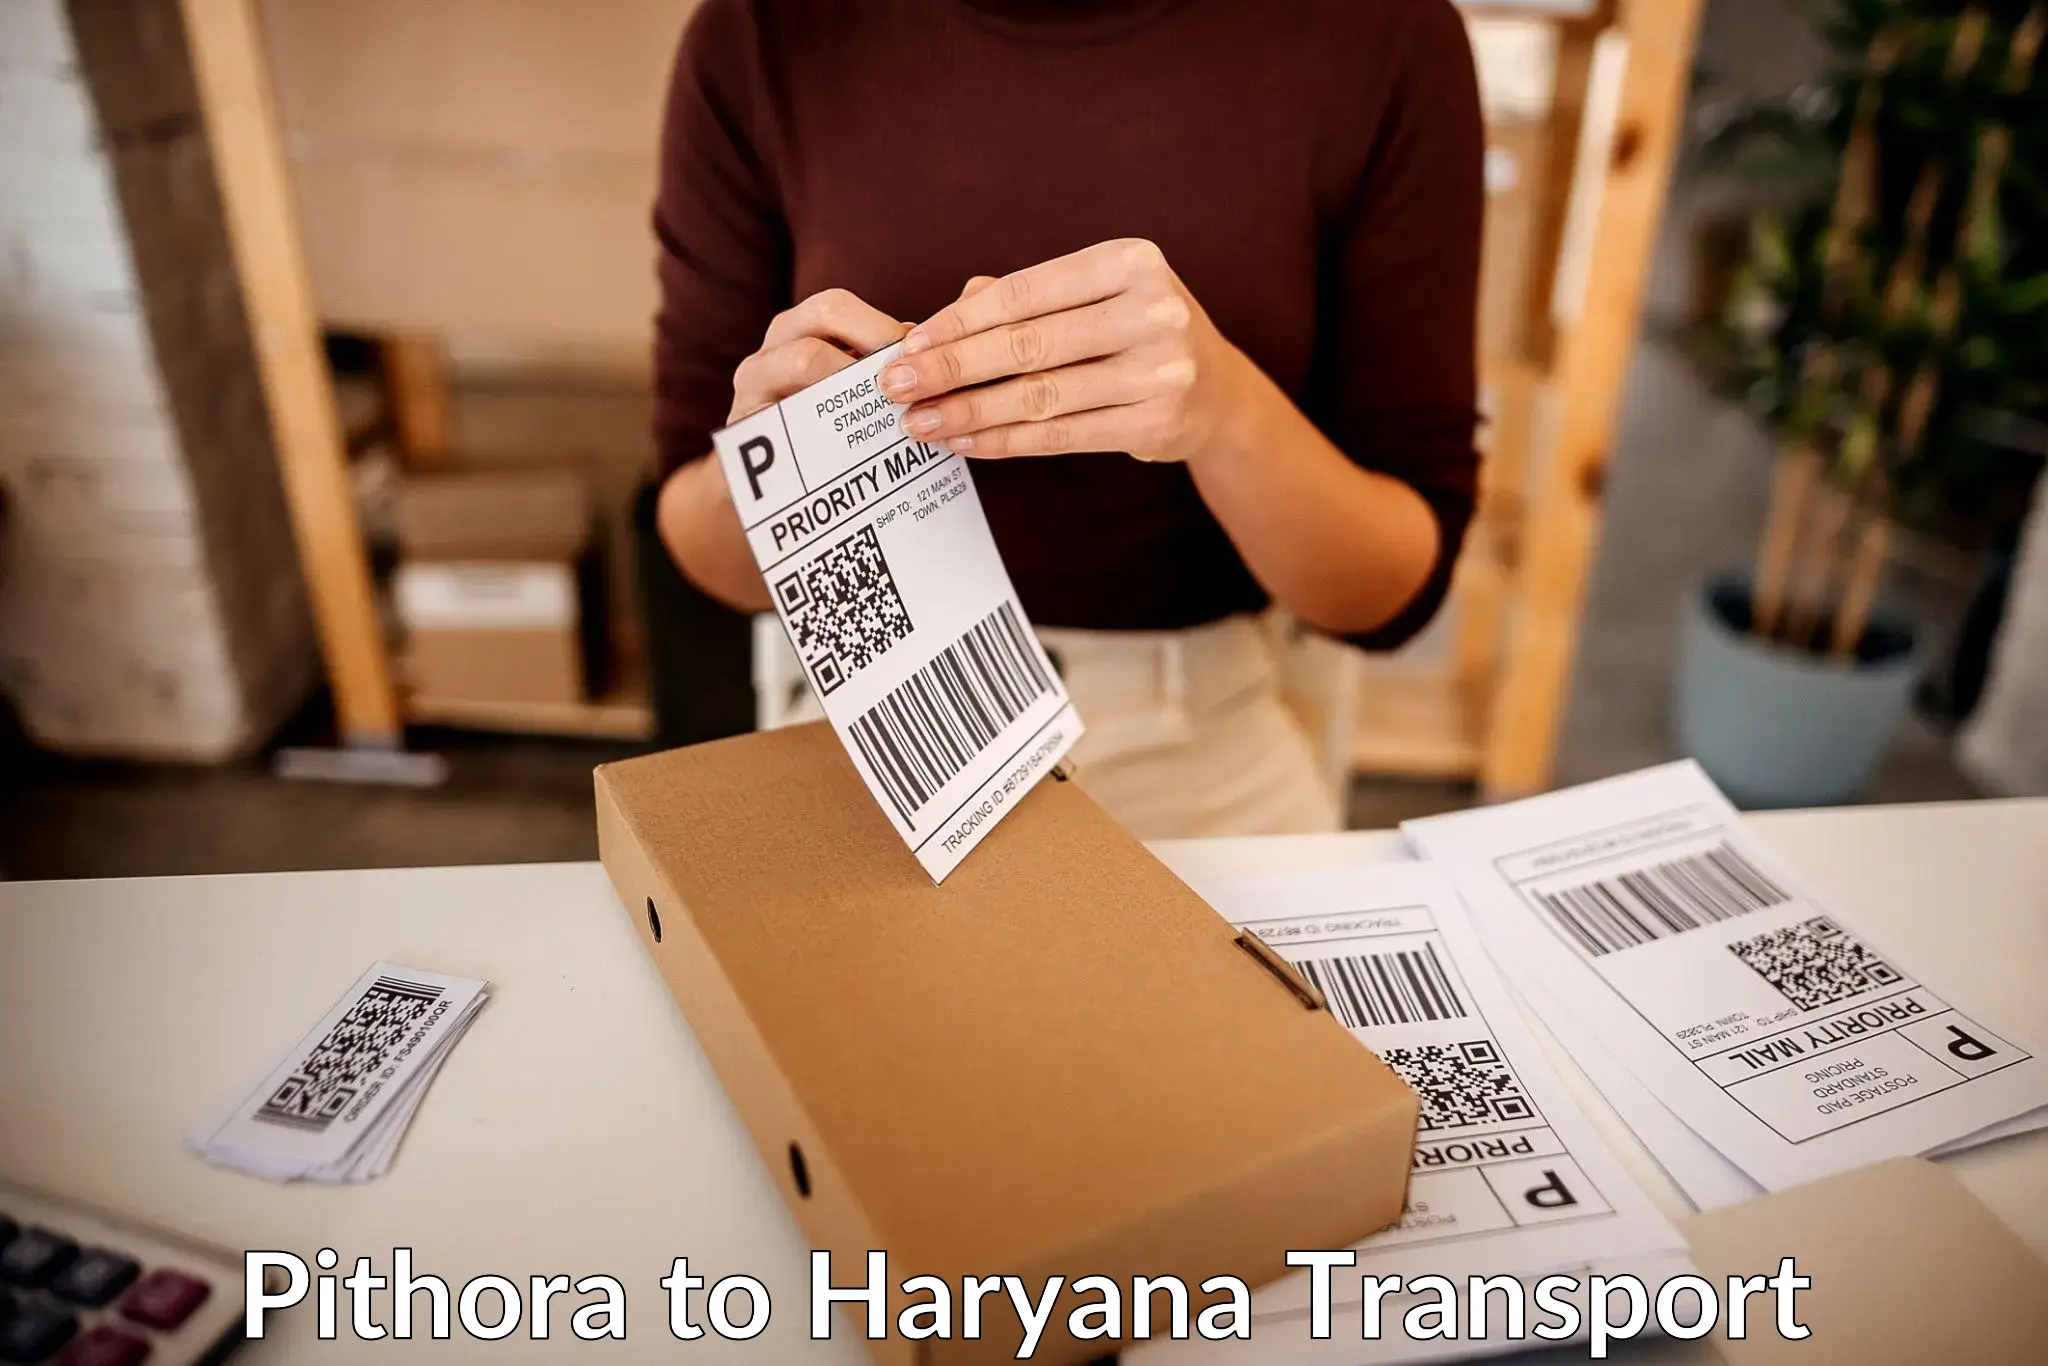 Truck transport companies in India Pithora to Haryana